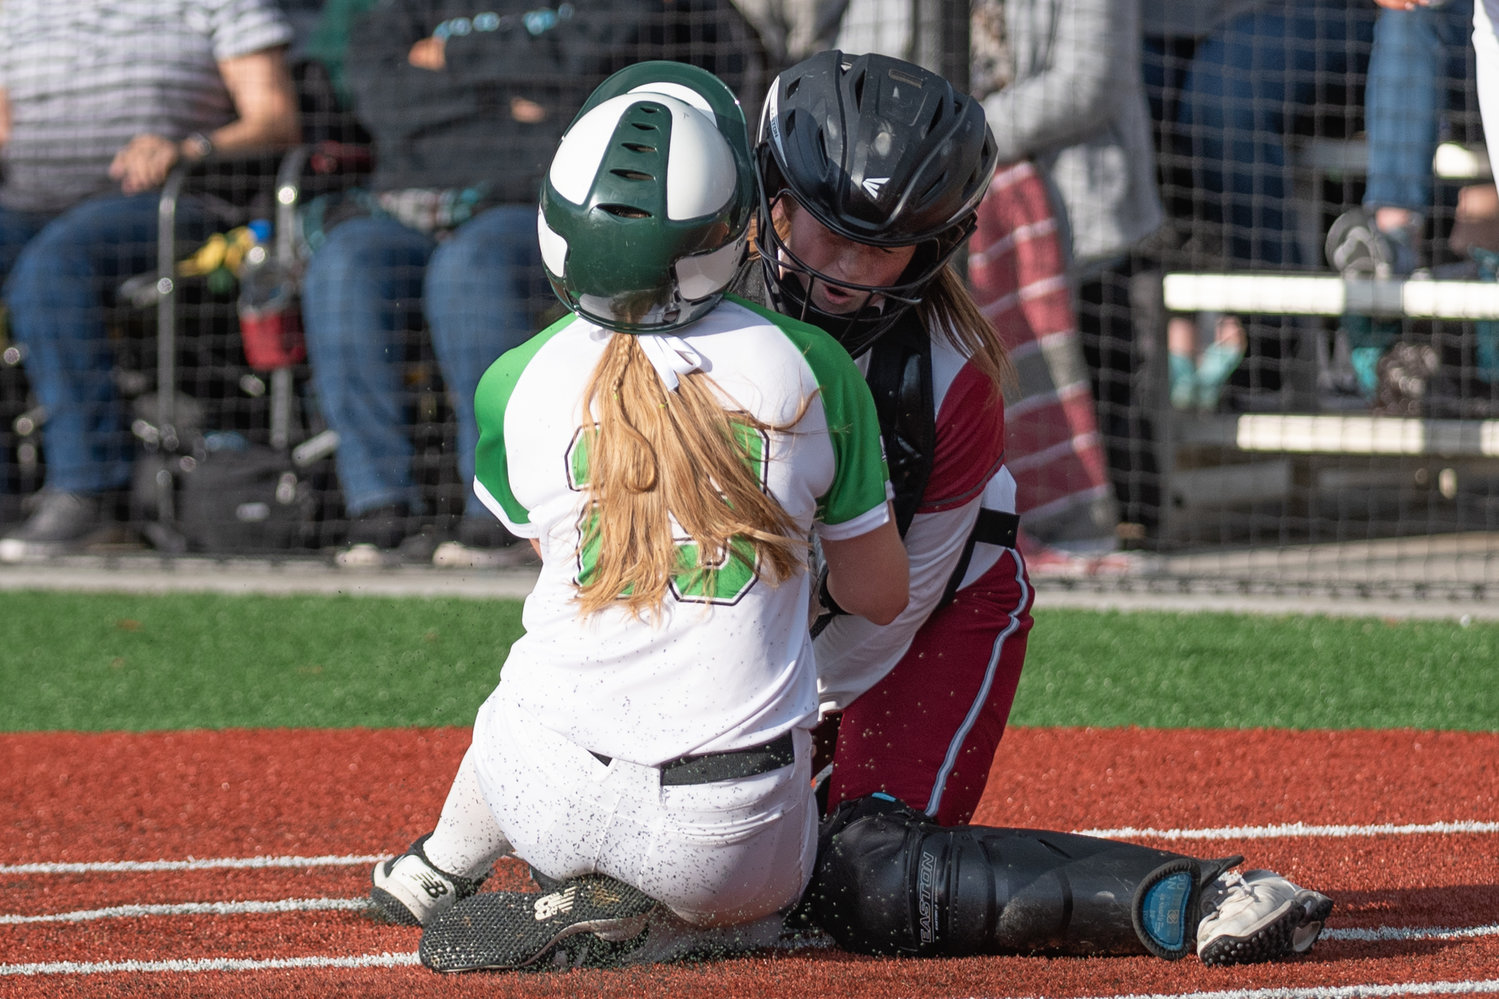 W.F. West catcher Rachel Gray holds her ground while Tumwater's Emily Robello slides into home plate in the 2A District 4 championship game at Rec Park May 20.